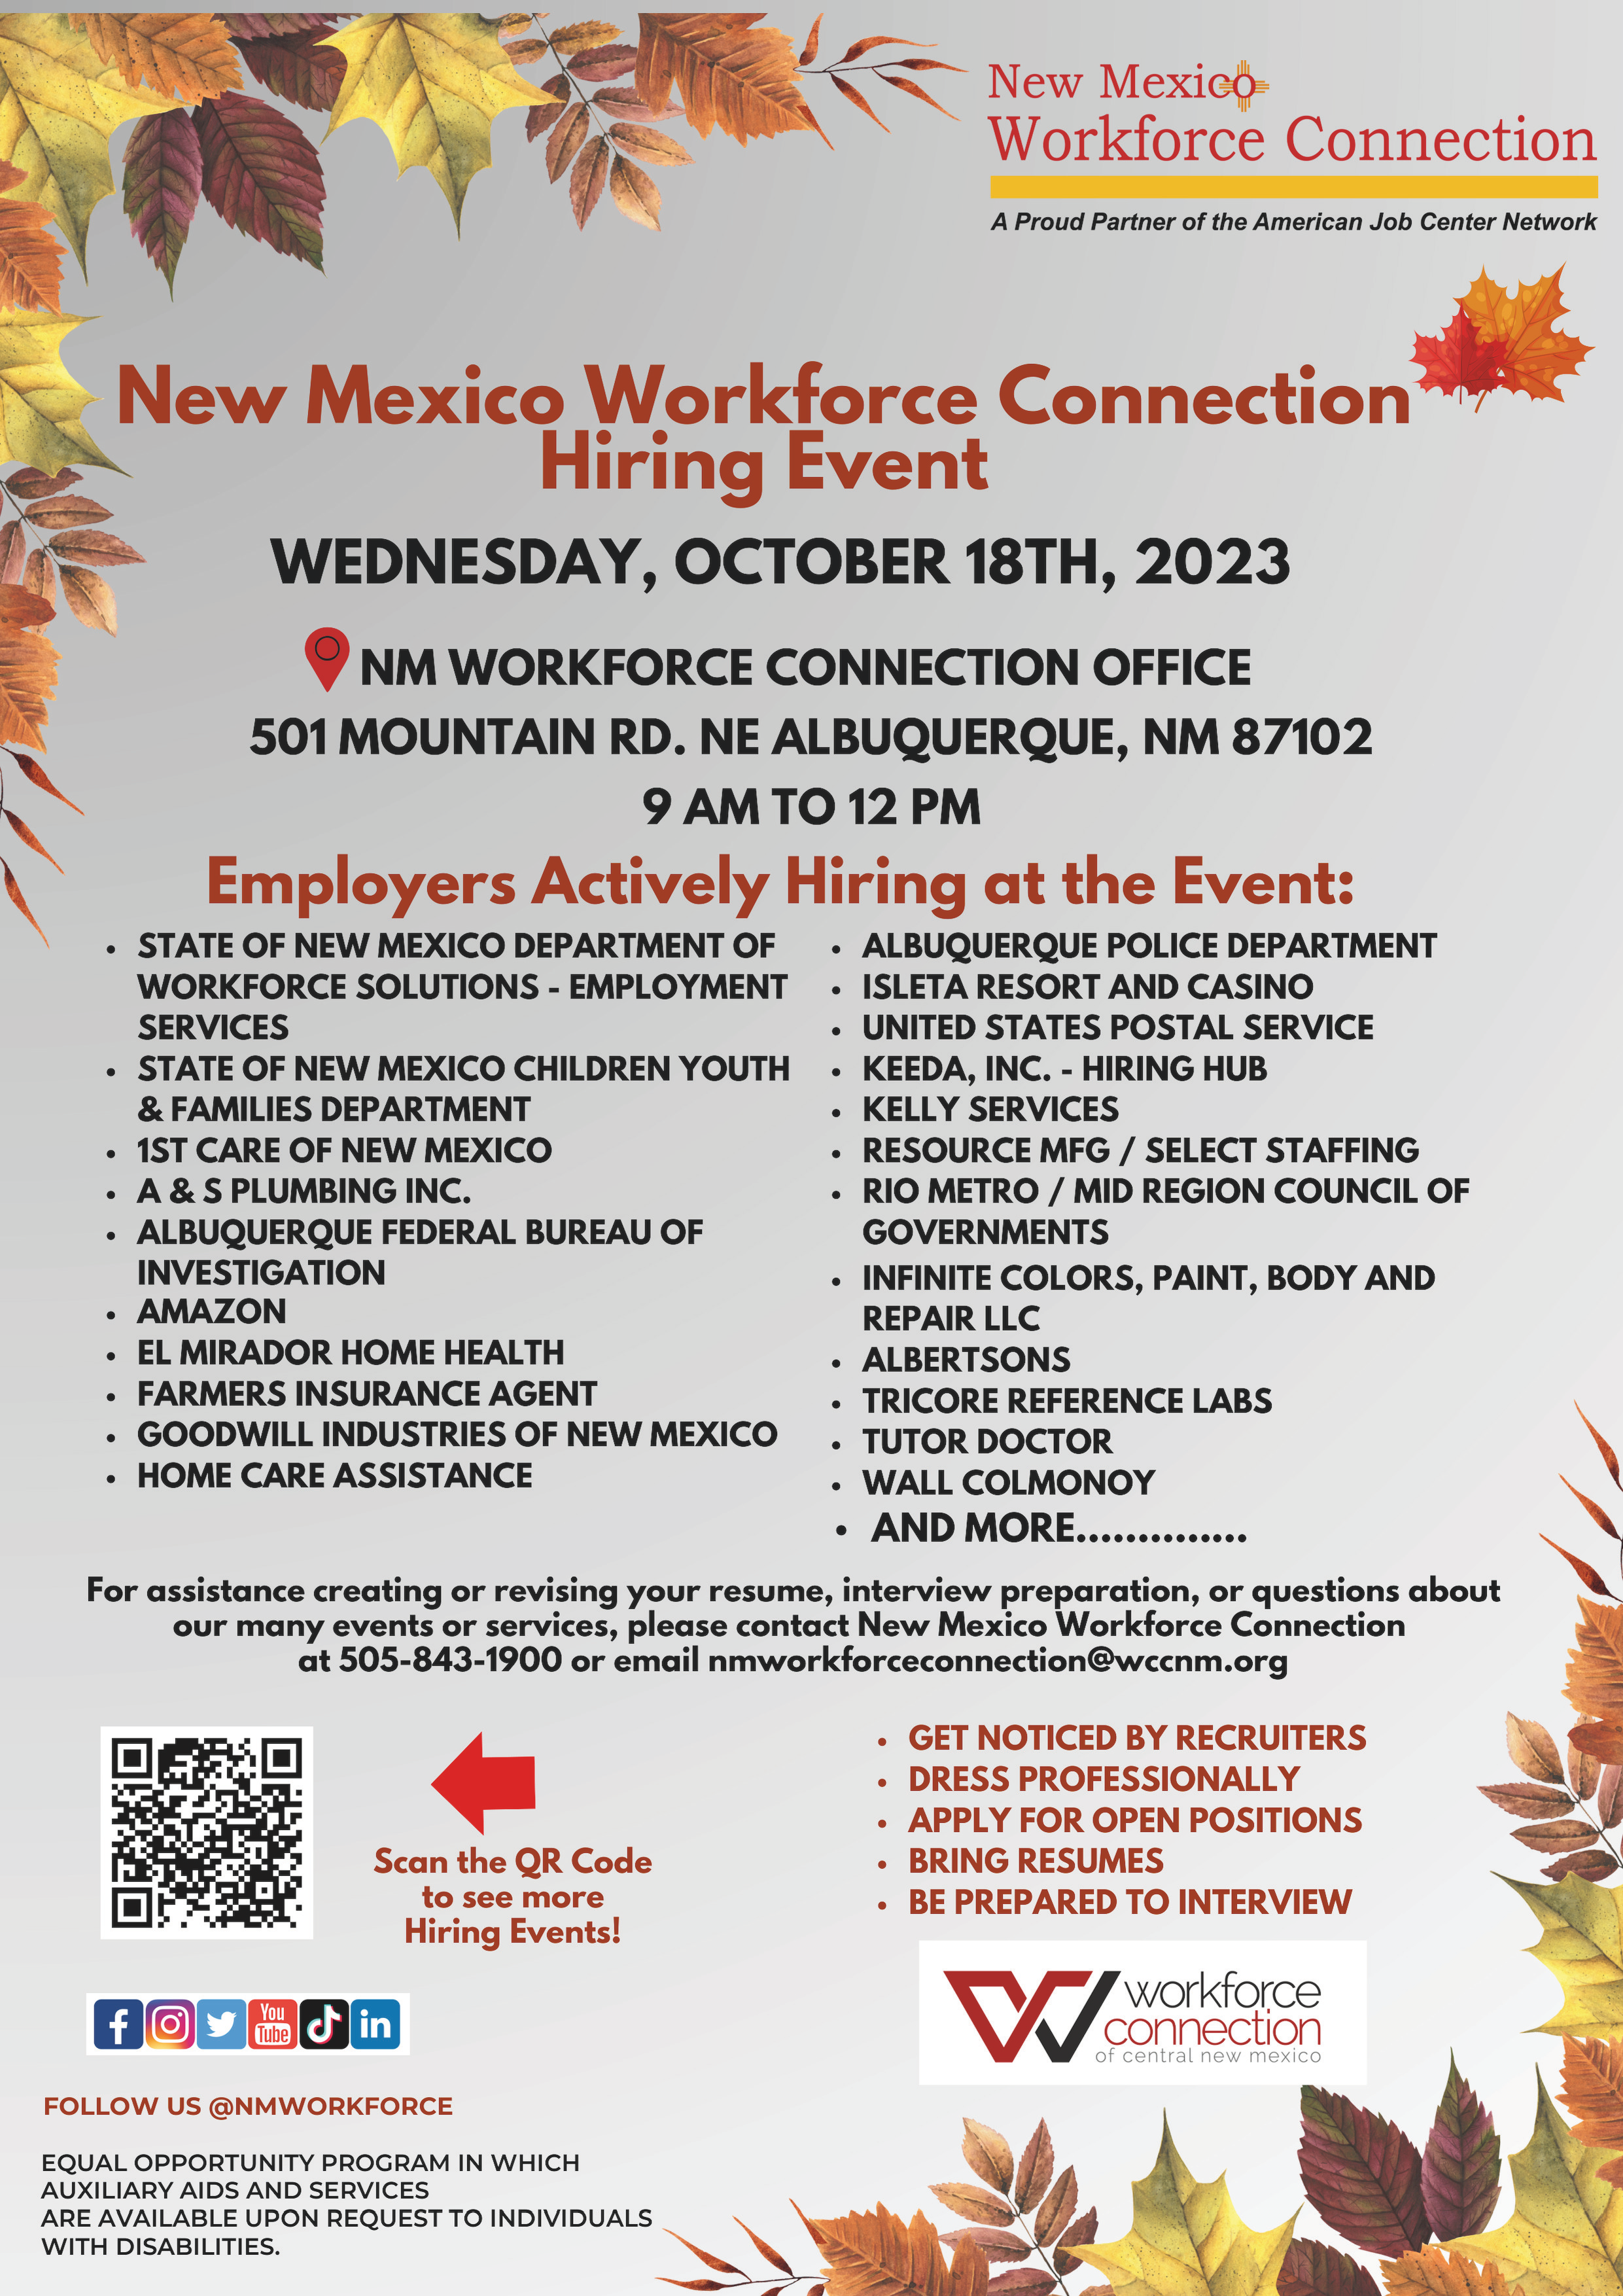 NM Workforce Connection Hiring Event flyer